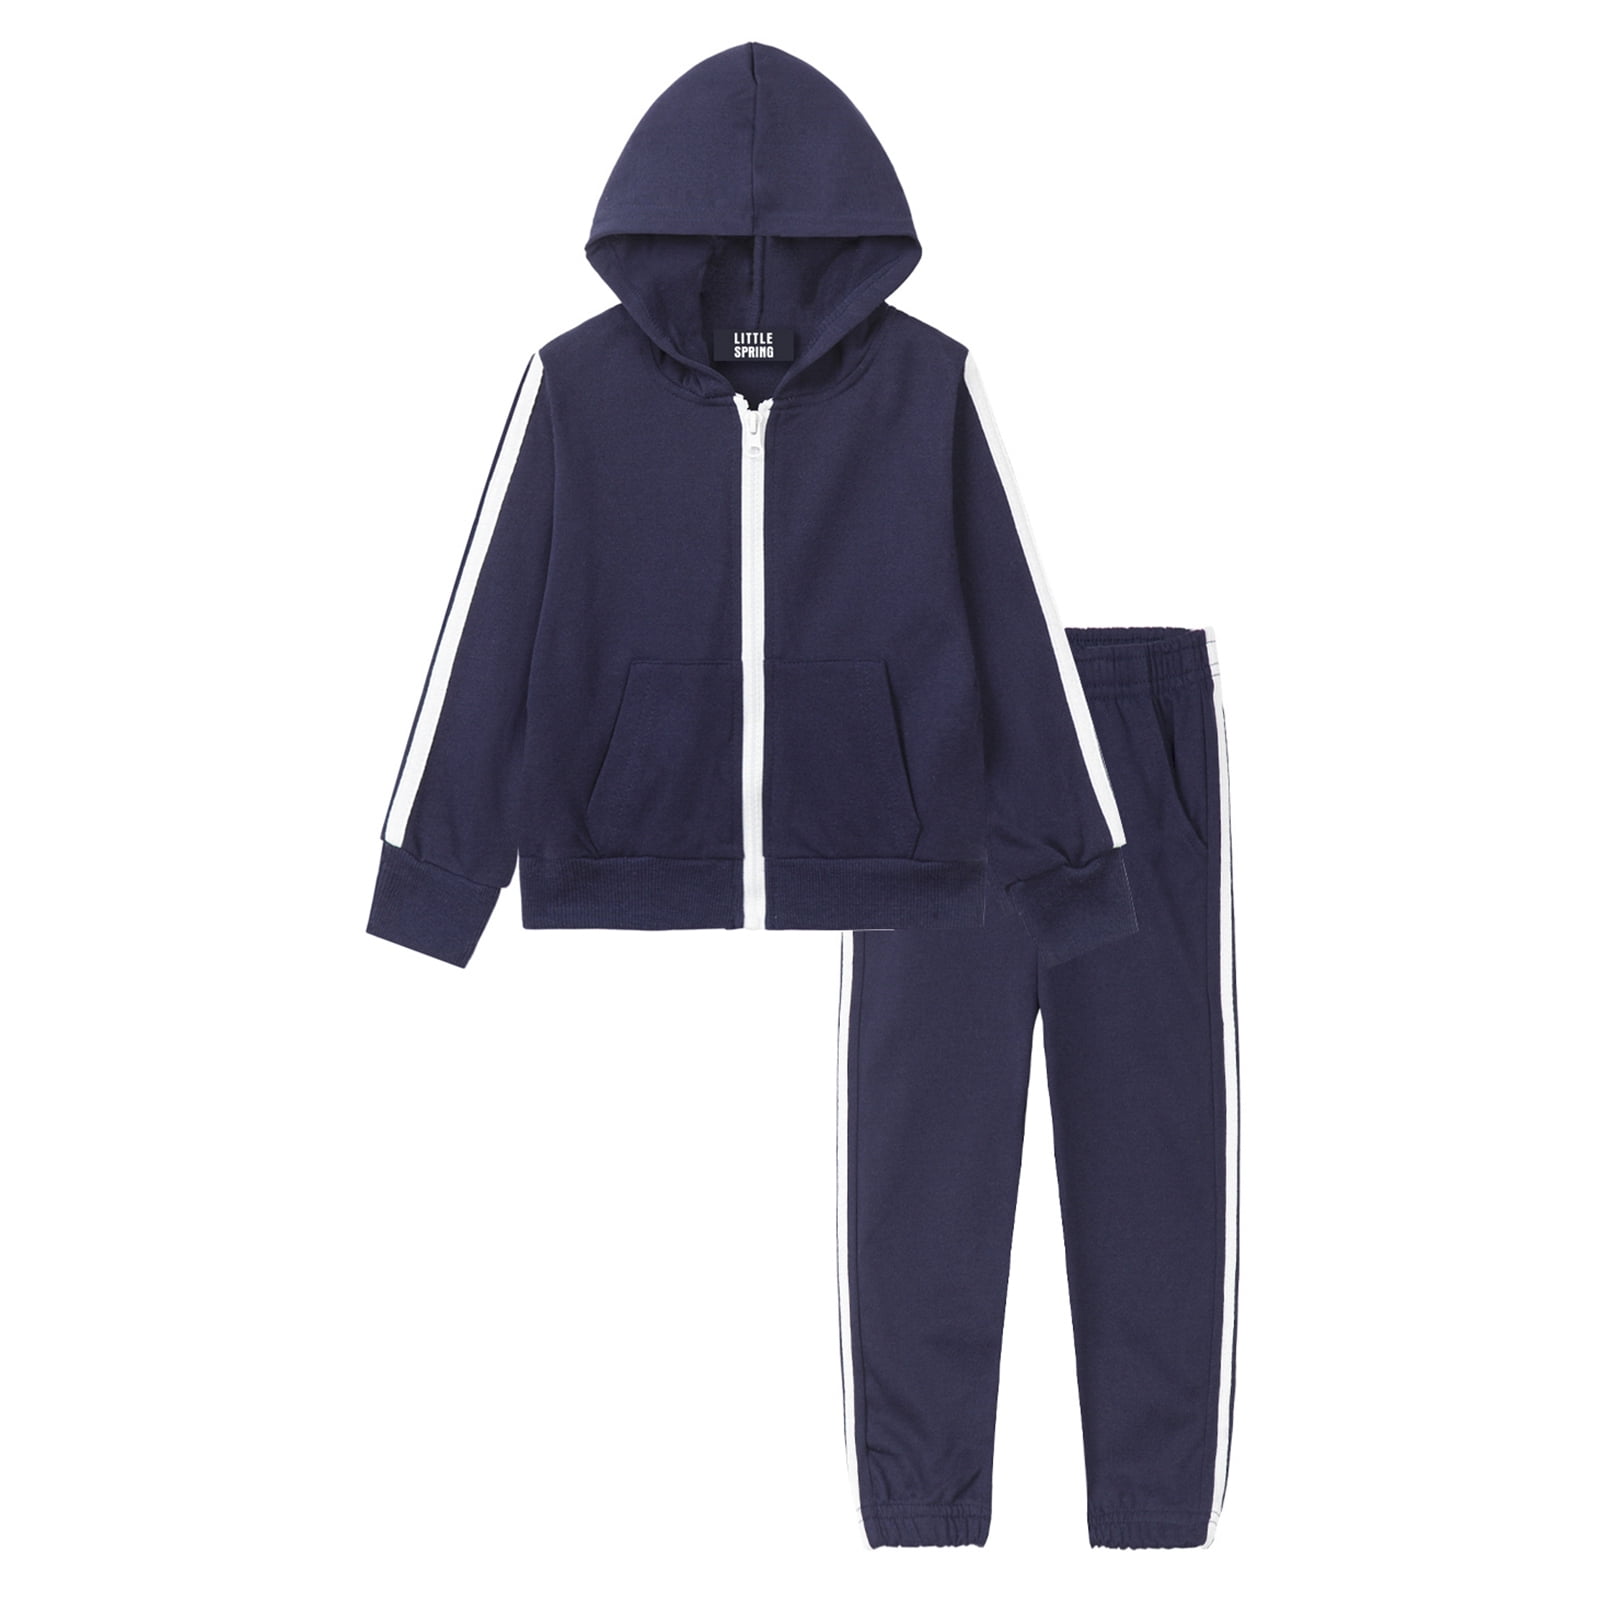 LittleSpring Toddler Boys Hoodie Sweatsuit and Pants Set 2 Pieces